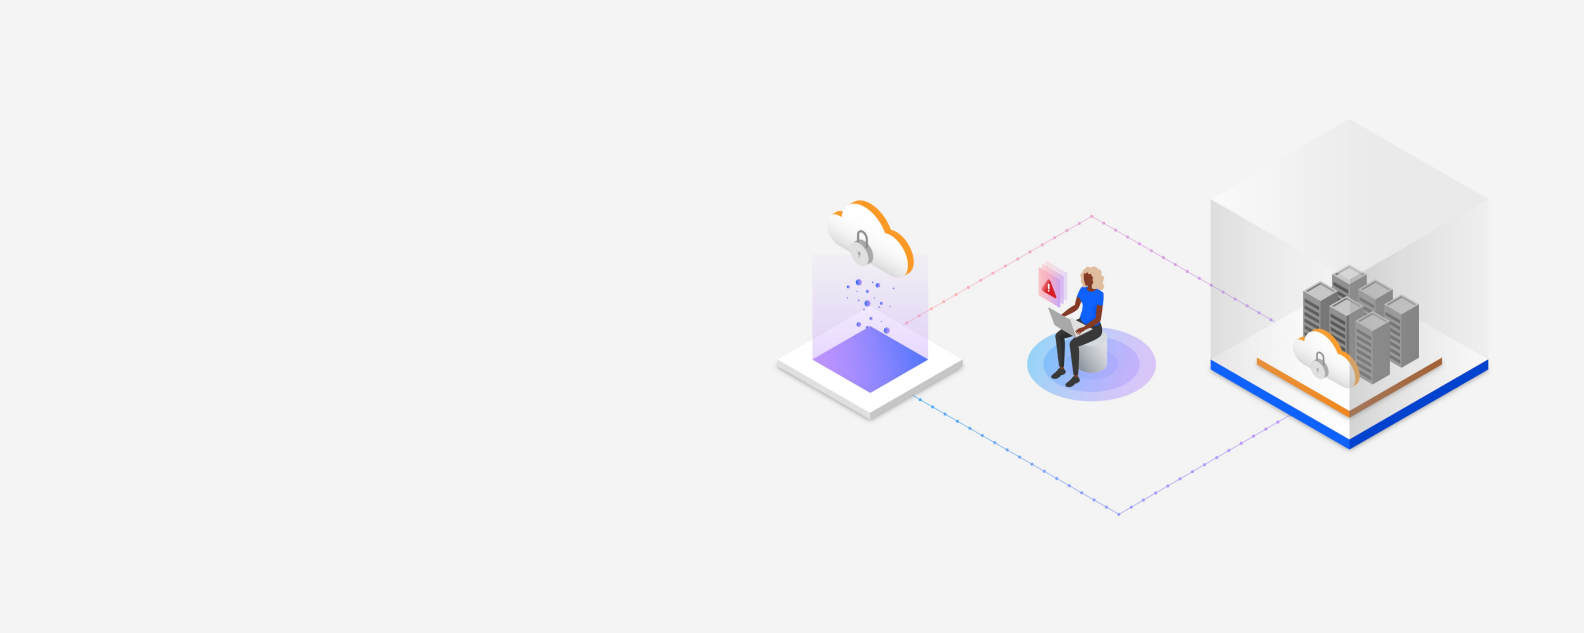 isometric Illustration of a person with a laptop accessing data connected to a secure cloud, servers and applications 